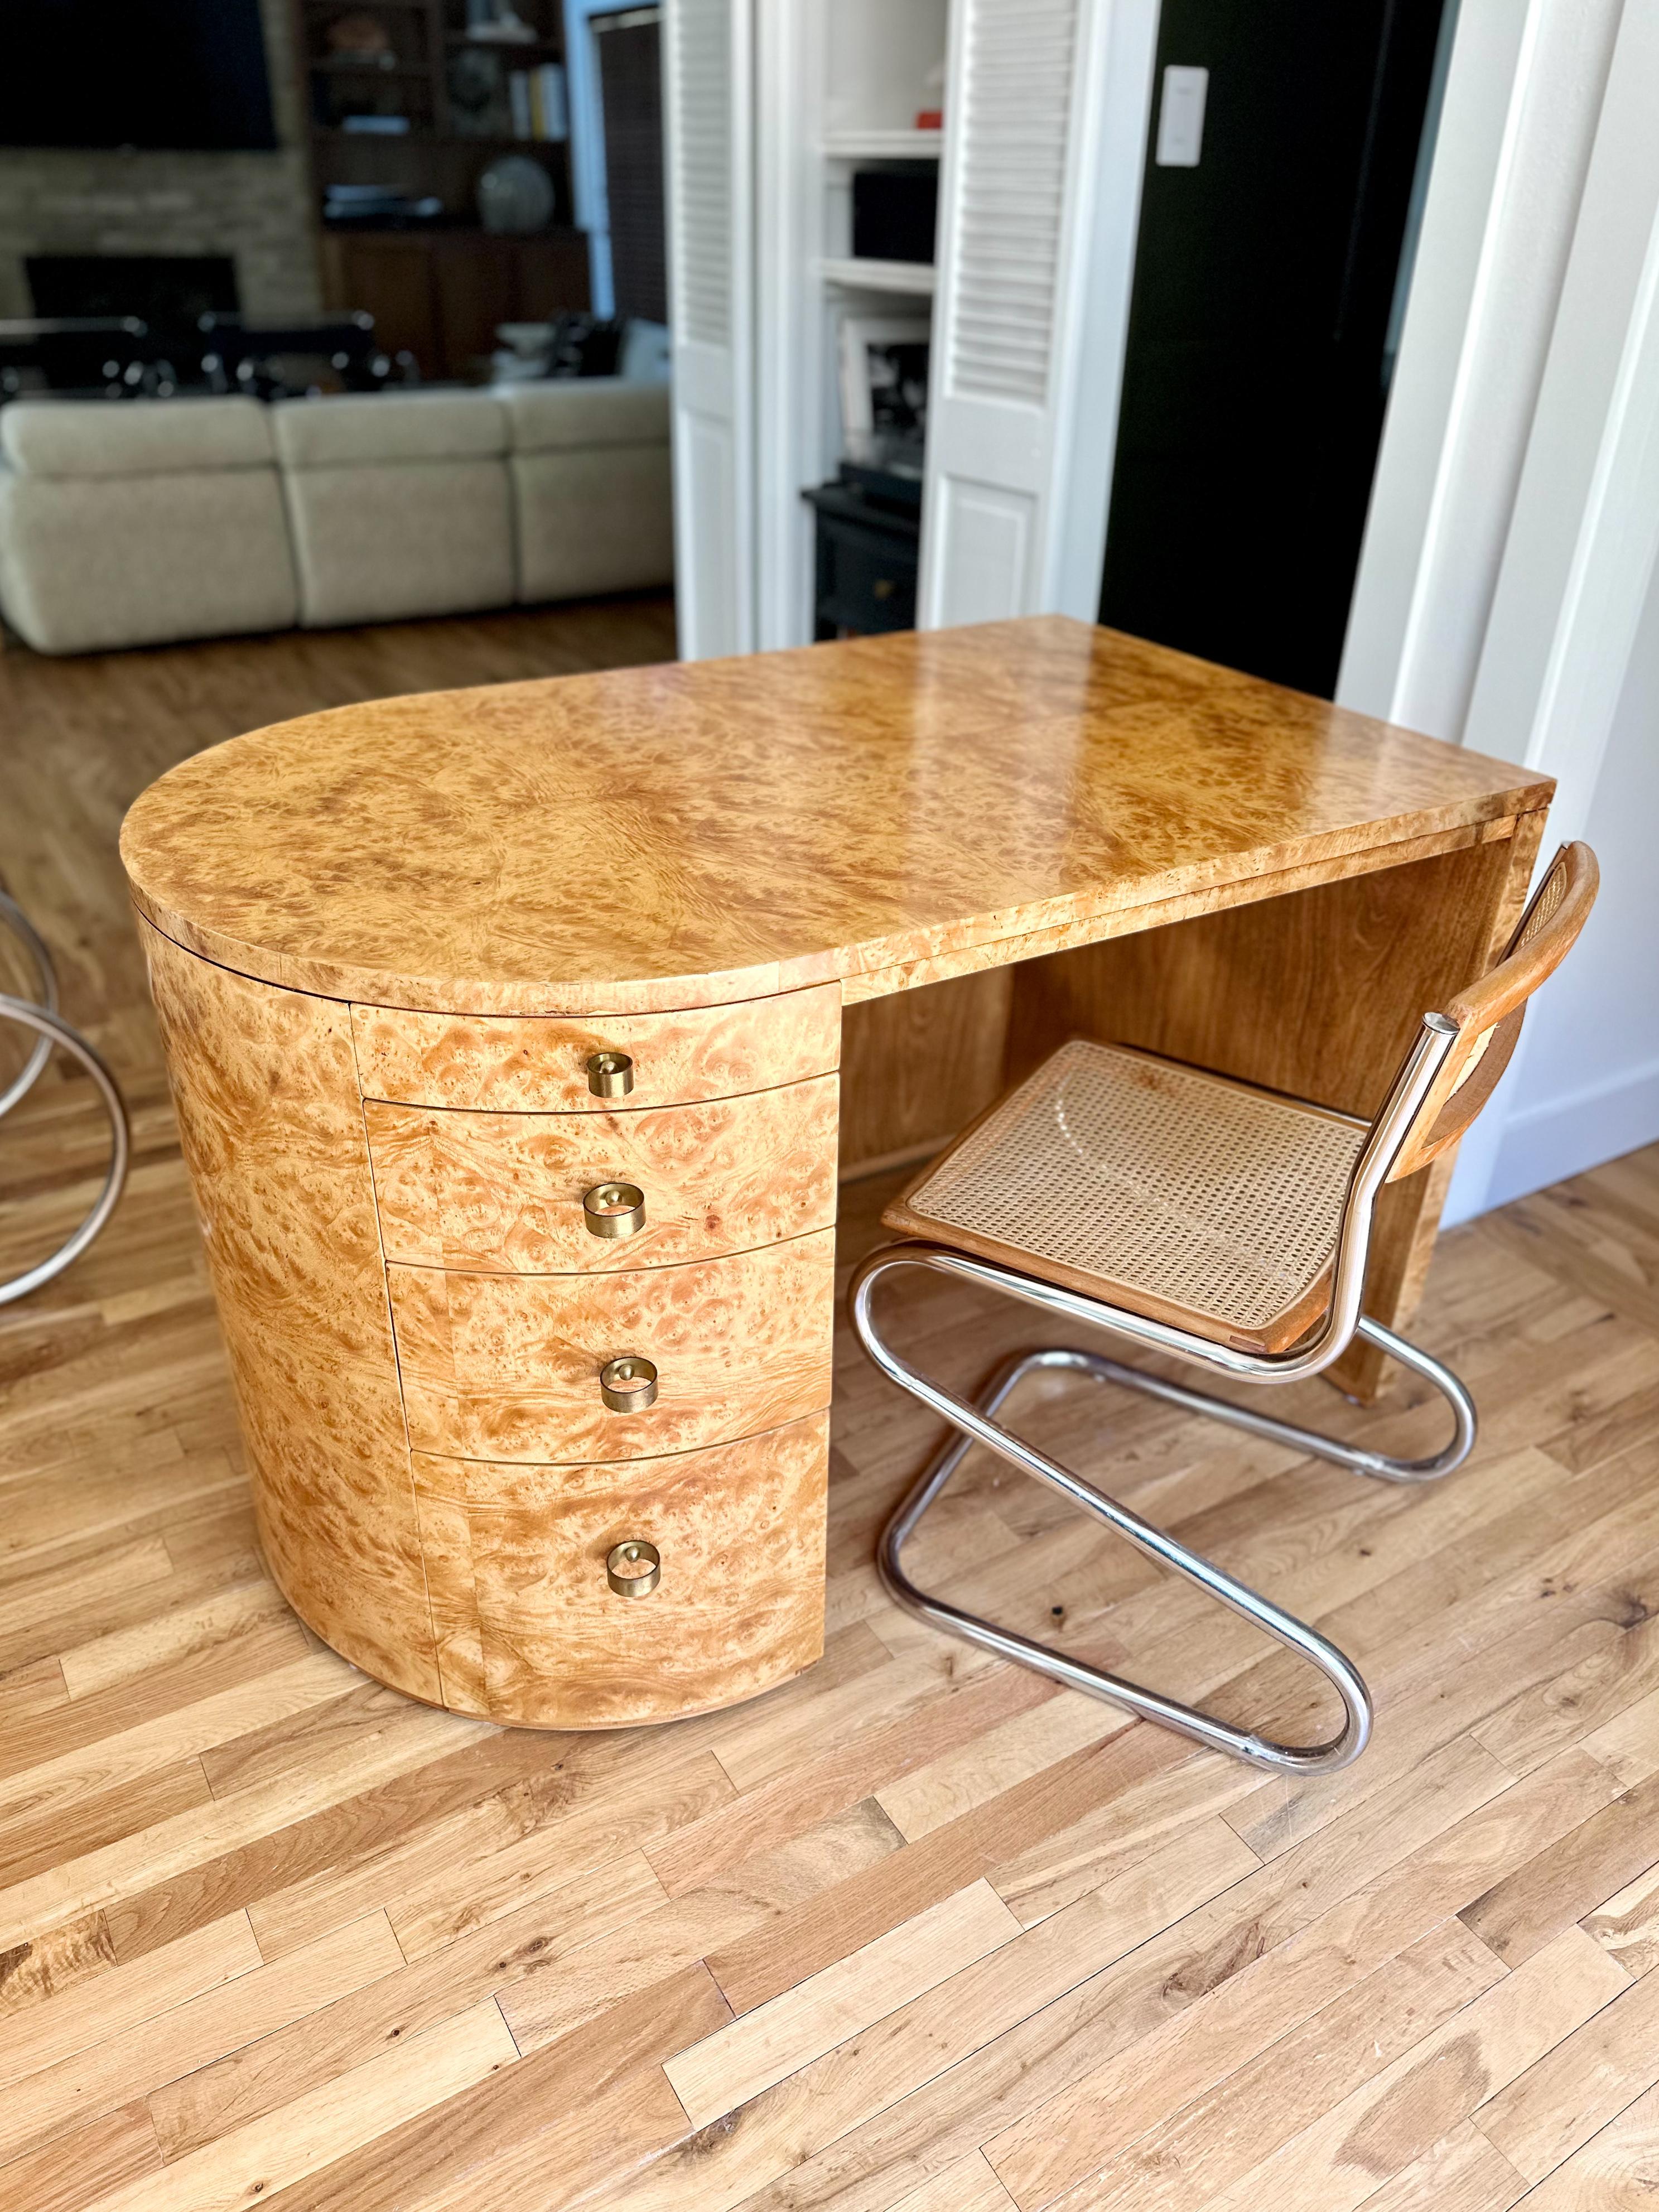 Drop dead gorgeous Art Deco style horseshoe-shaped burl wood desk, meticulously restored and finished from all angles. This vintage, custom-made piece is incredibly solid and built to last. Albeit compact, this is packs a punch and no detail was